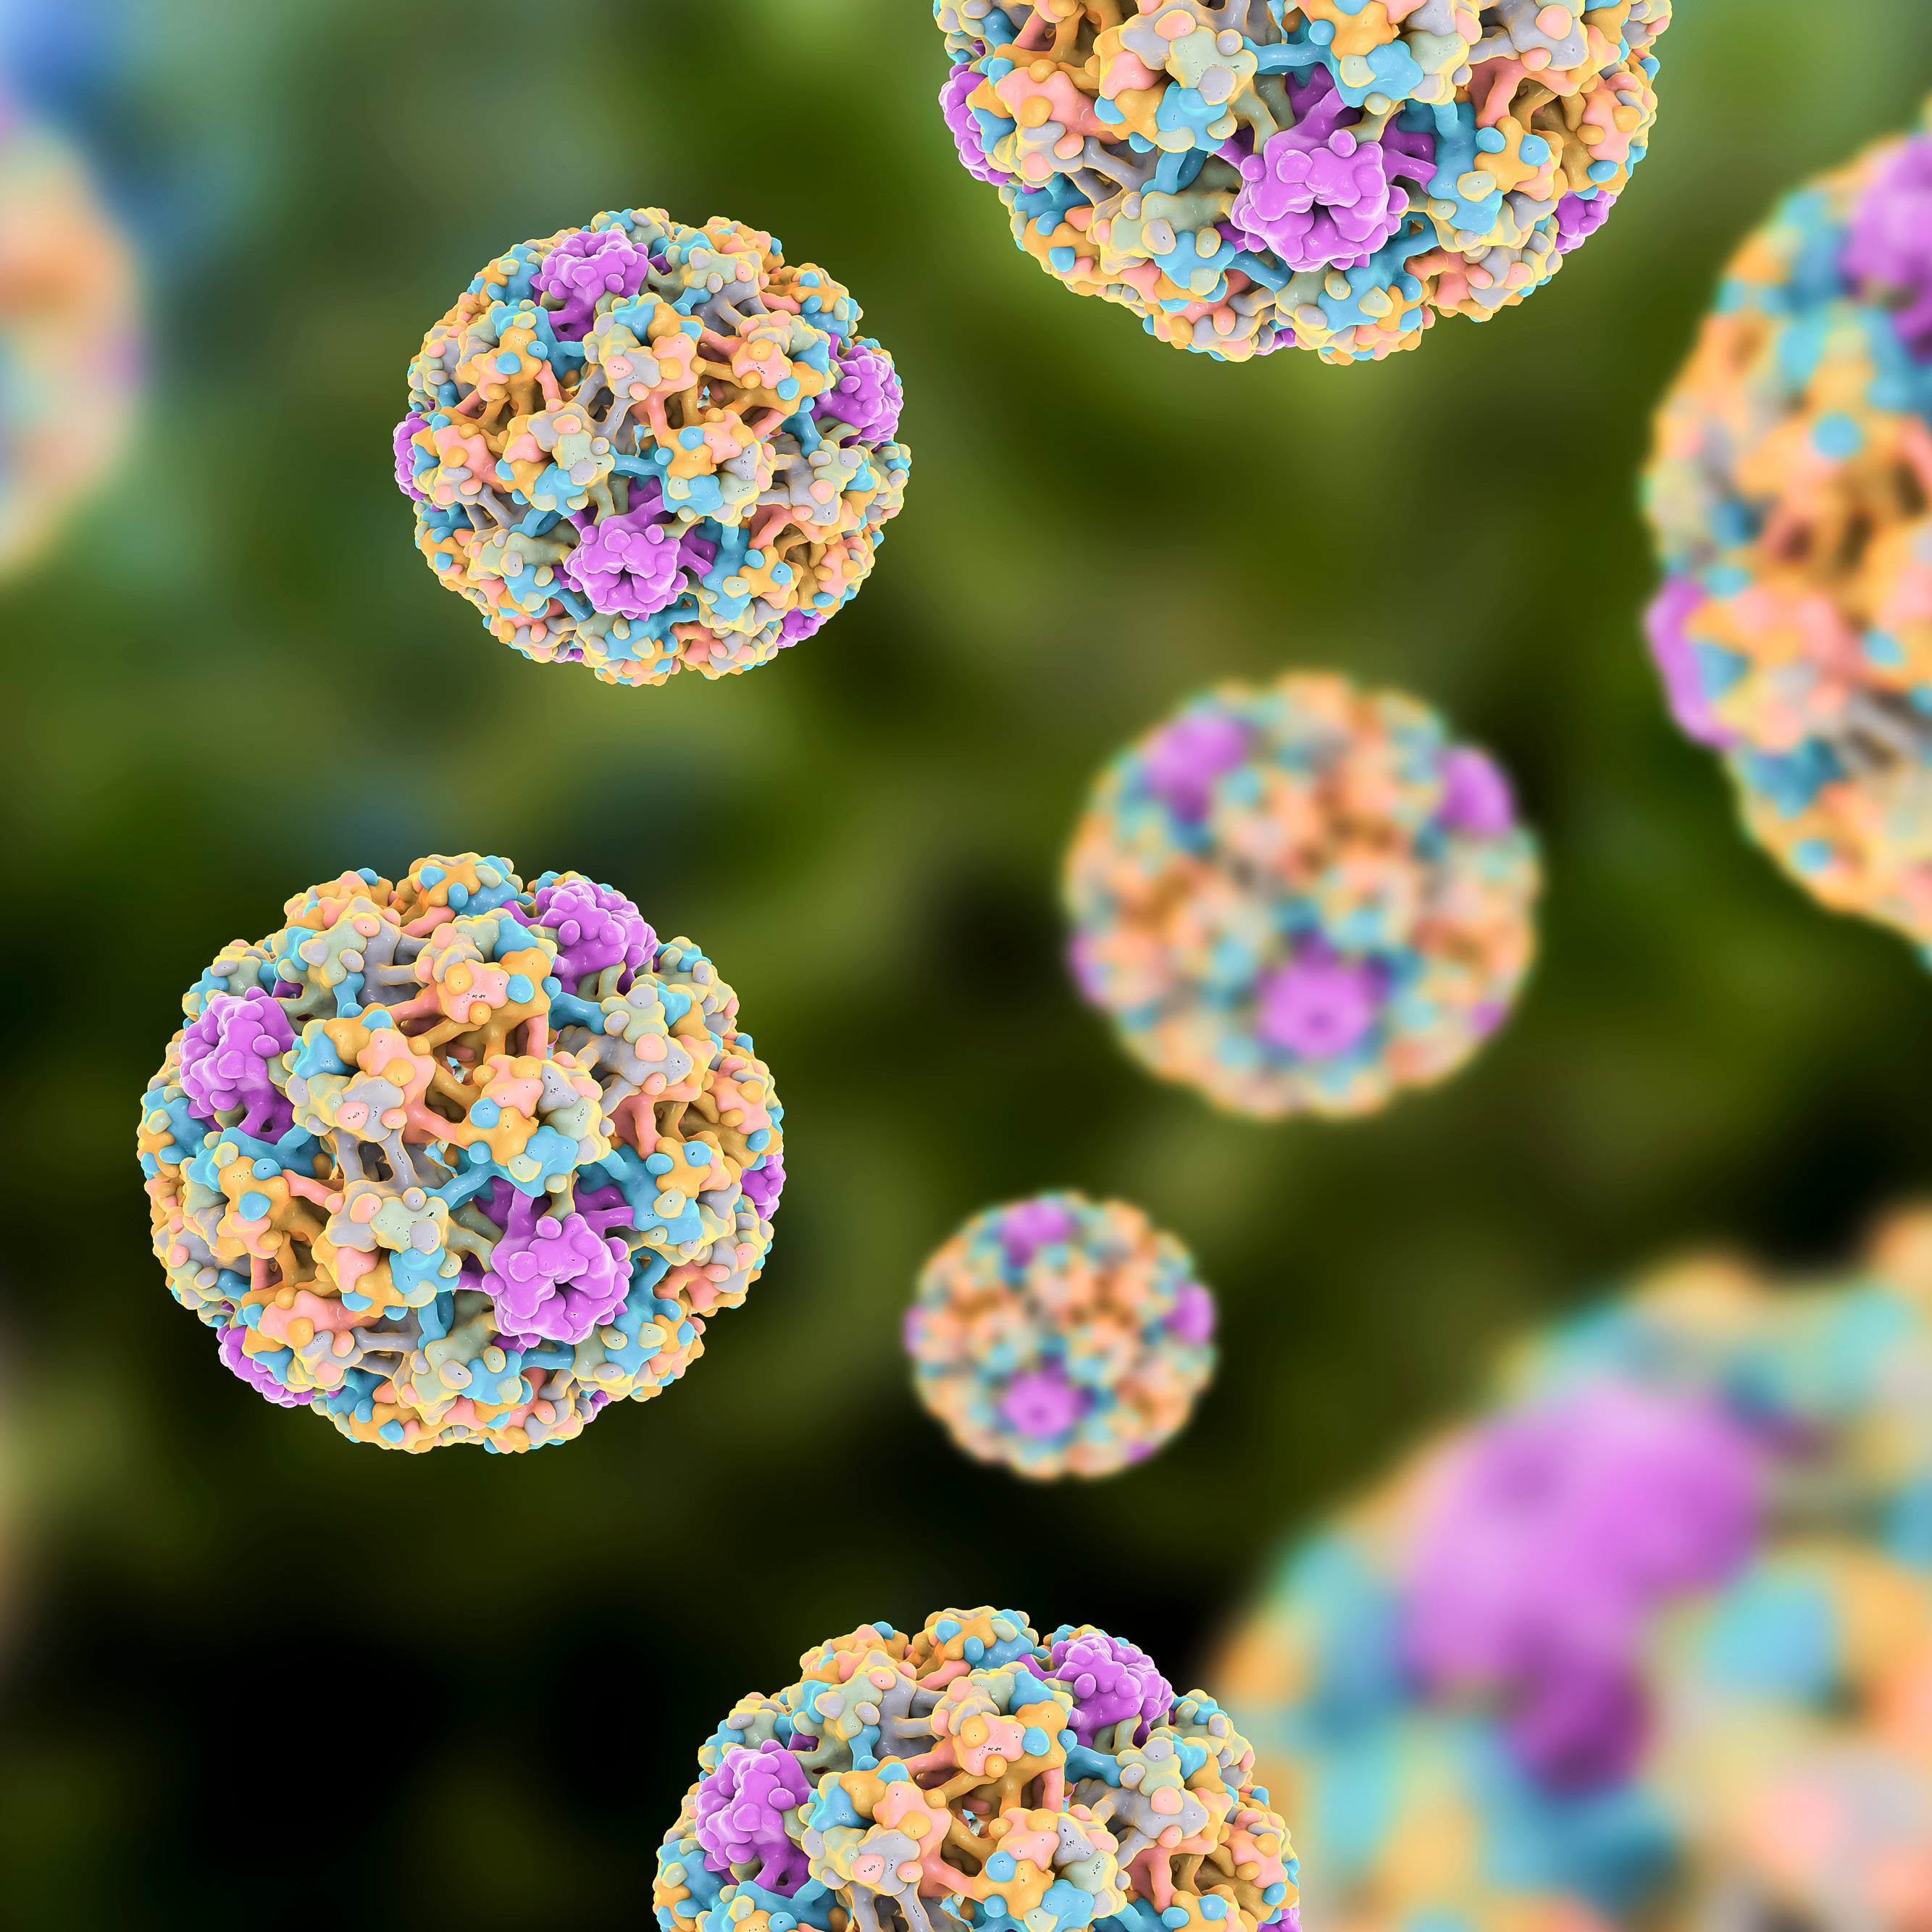 An images shows a 3D model of the human papilloma virus.